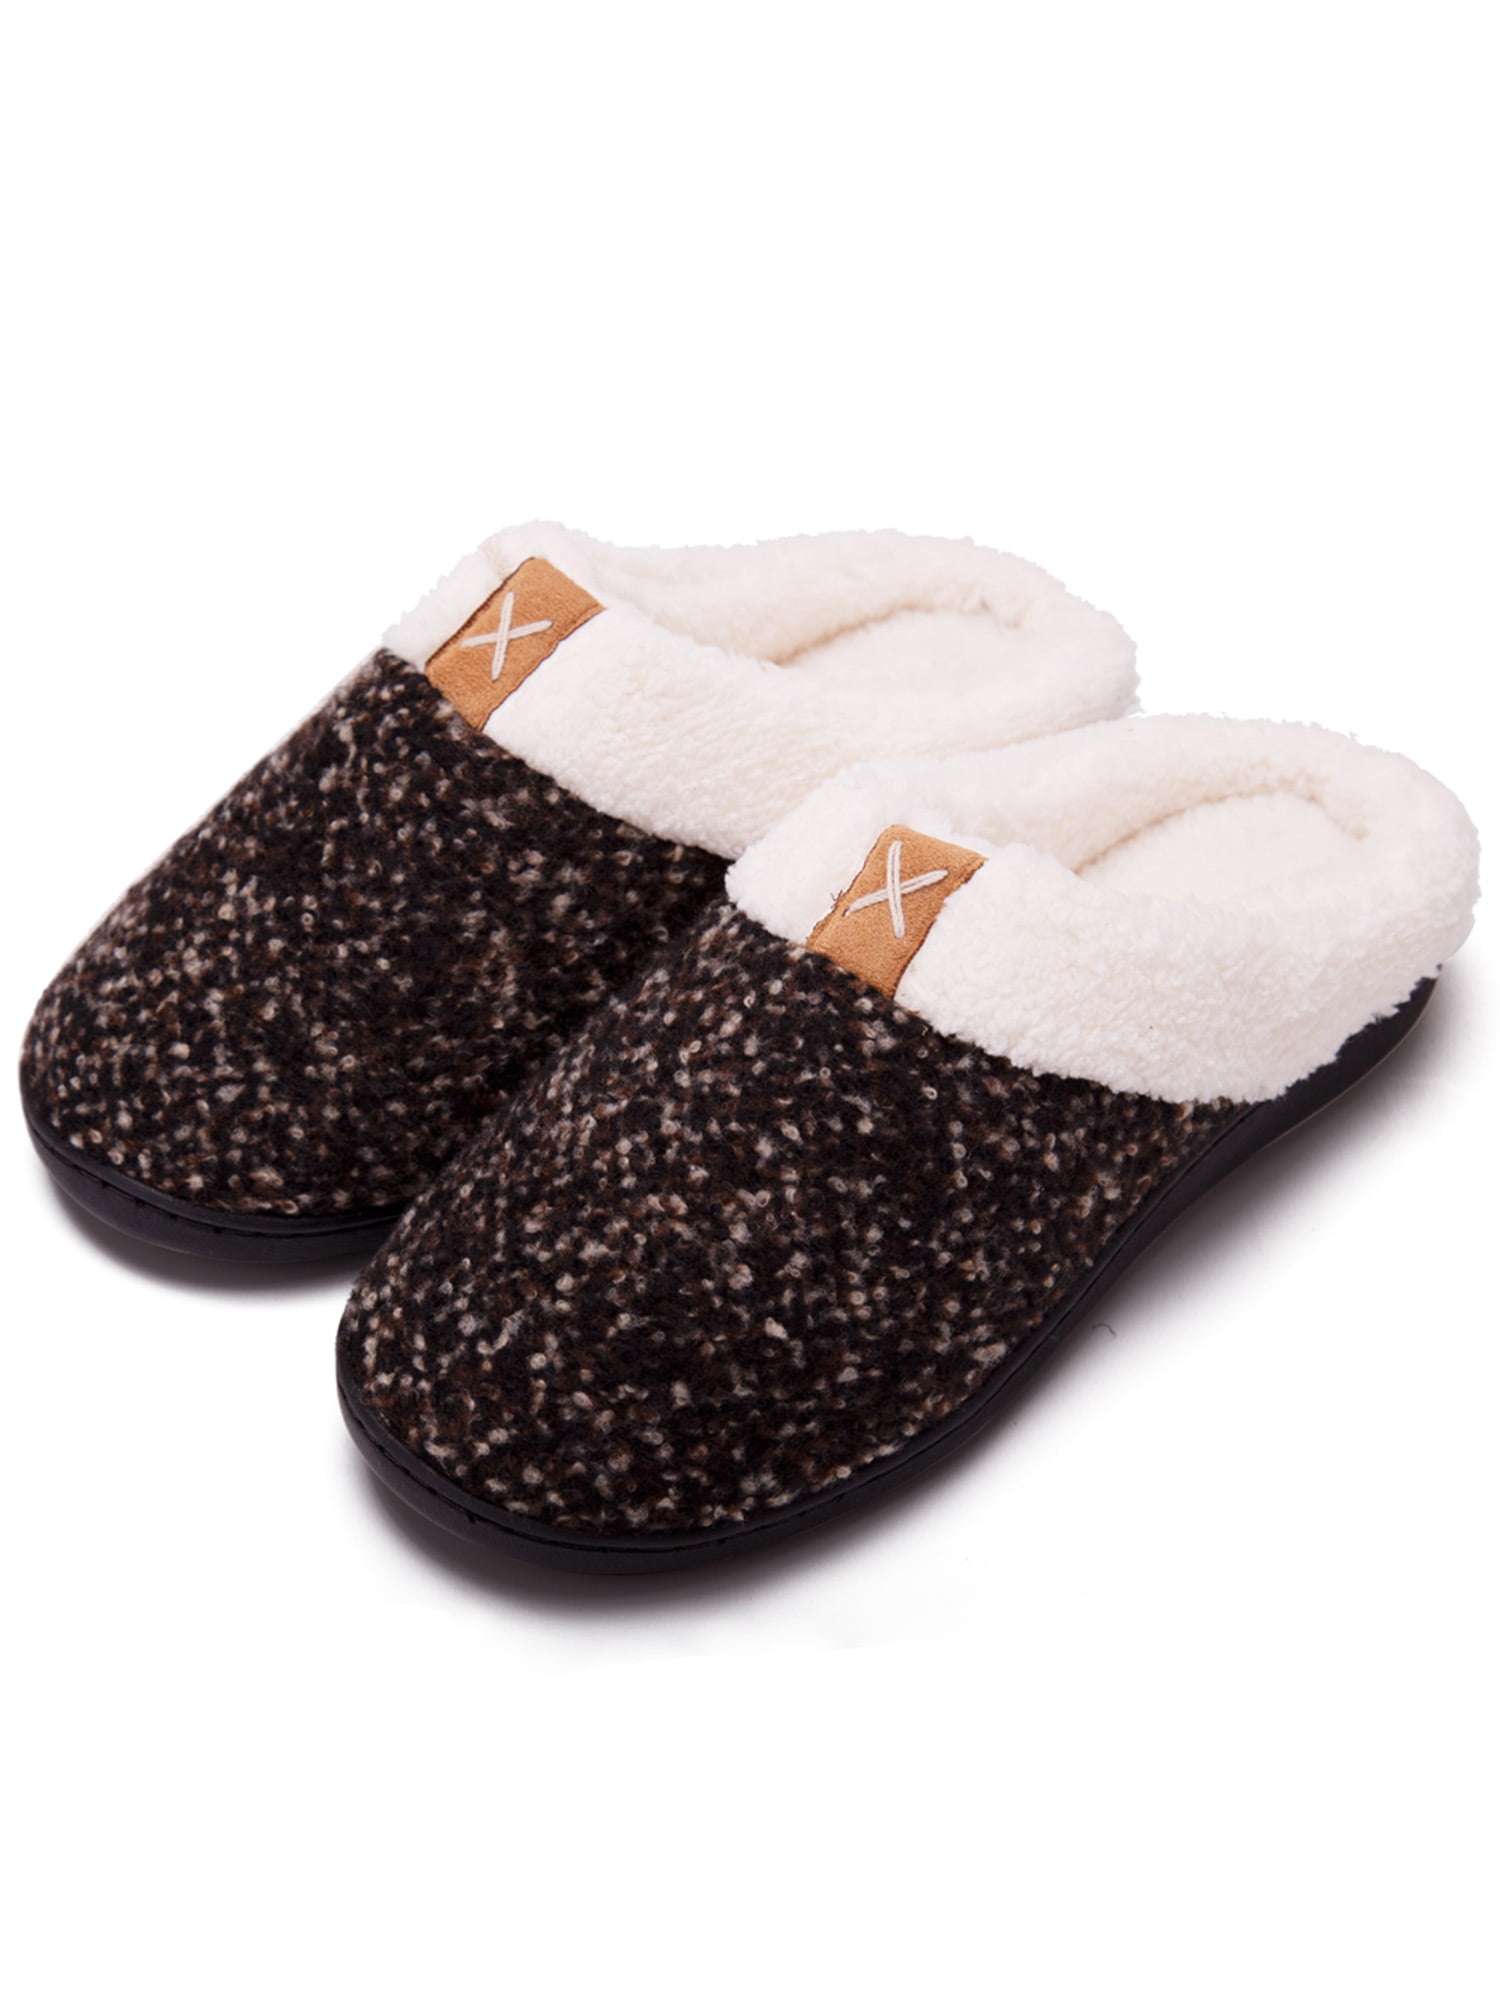 2018 Ladies Slippers House Shoes Mens Slippers Warm Slippers Better Cotton Fashion Warm House Slippers for Women Mens 